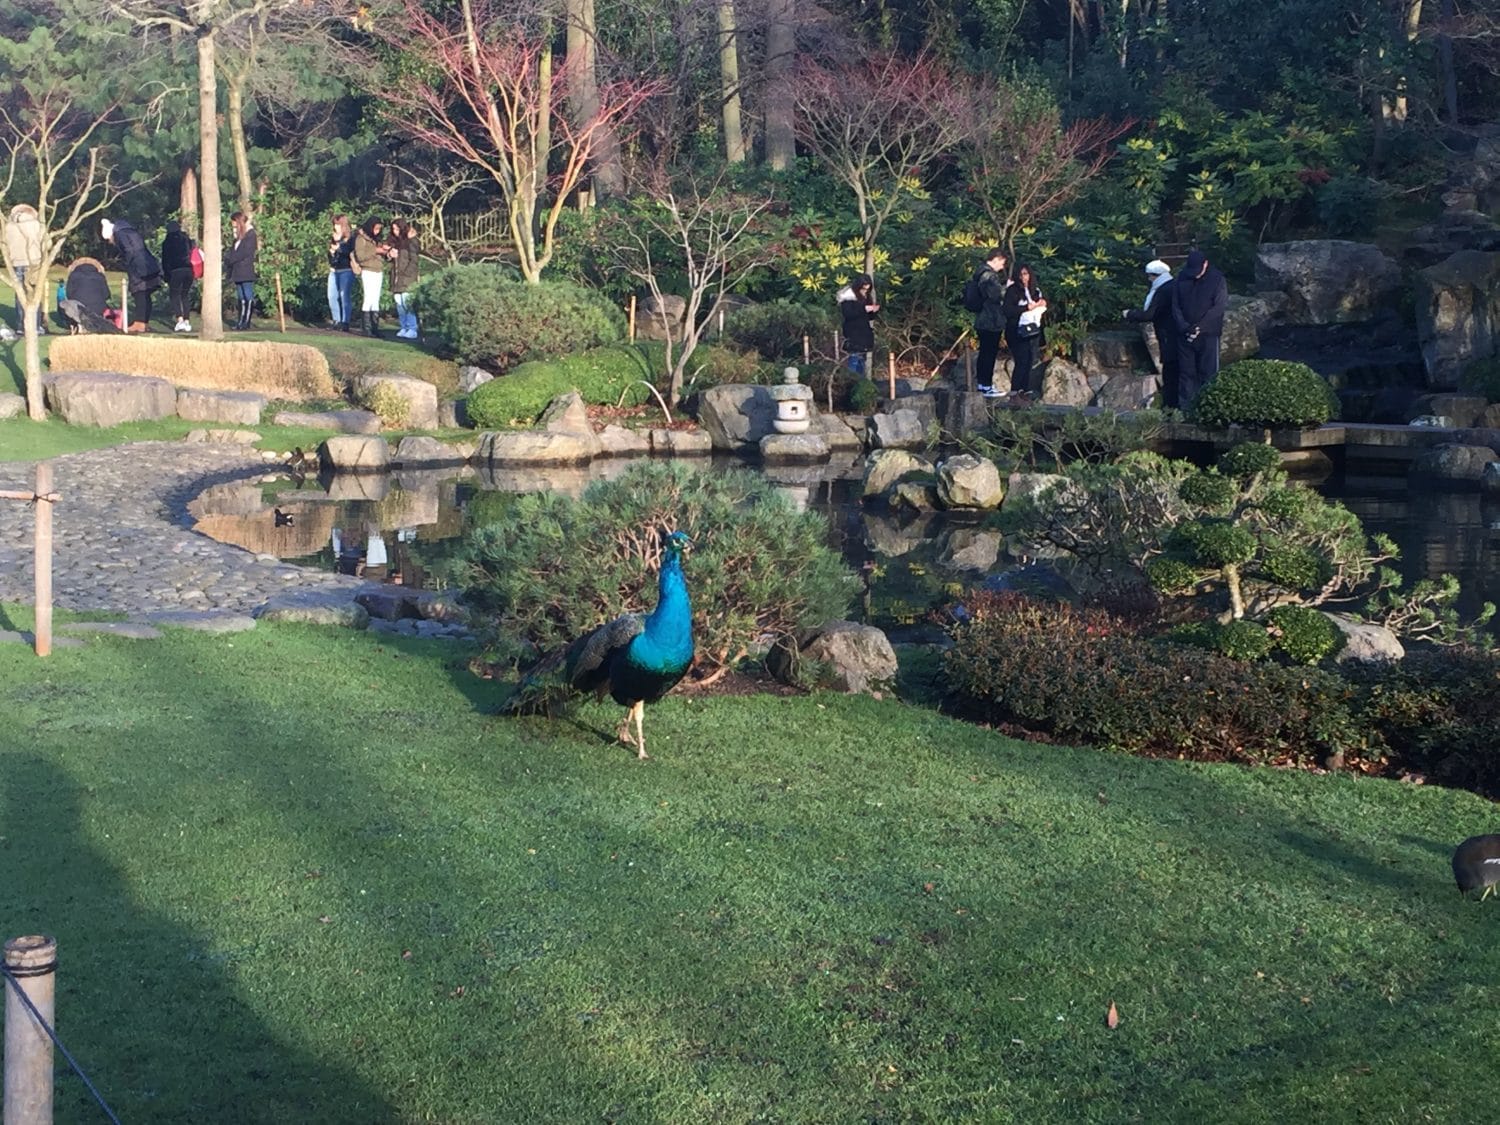 Enjoy the open spaces of Holland Park and its pretty Kyoto Garden